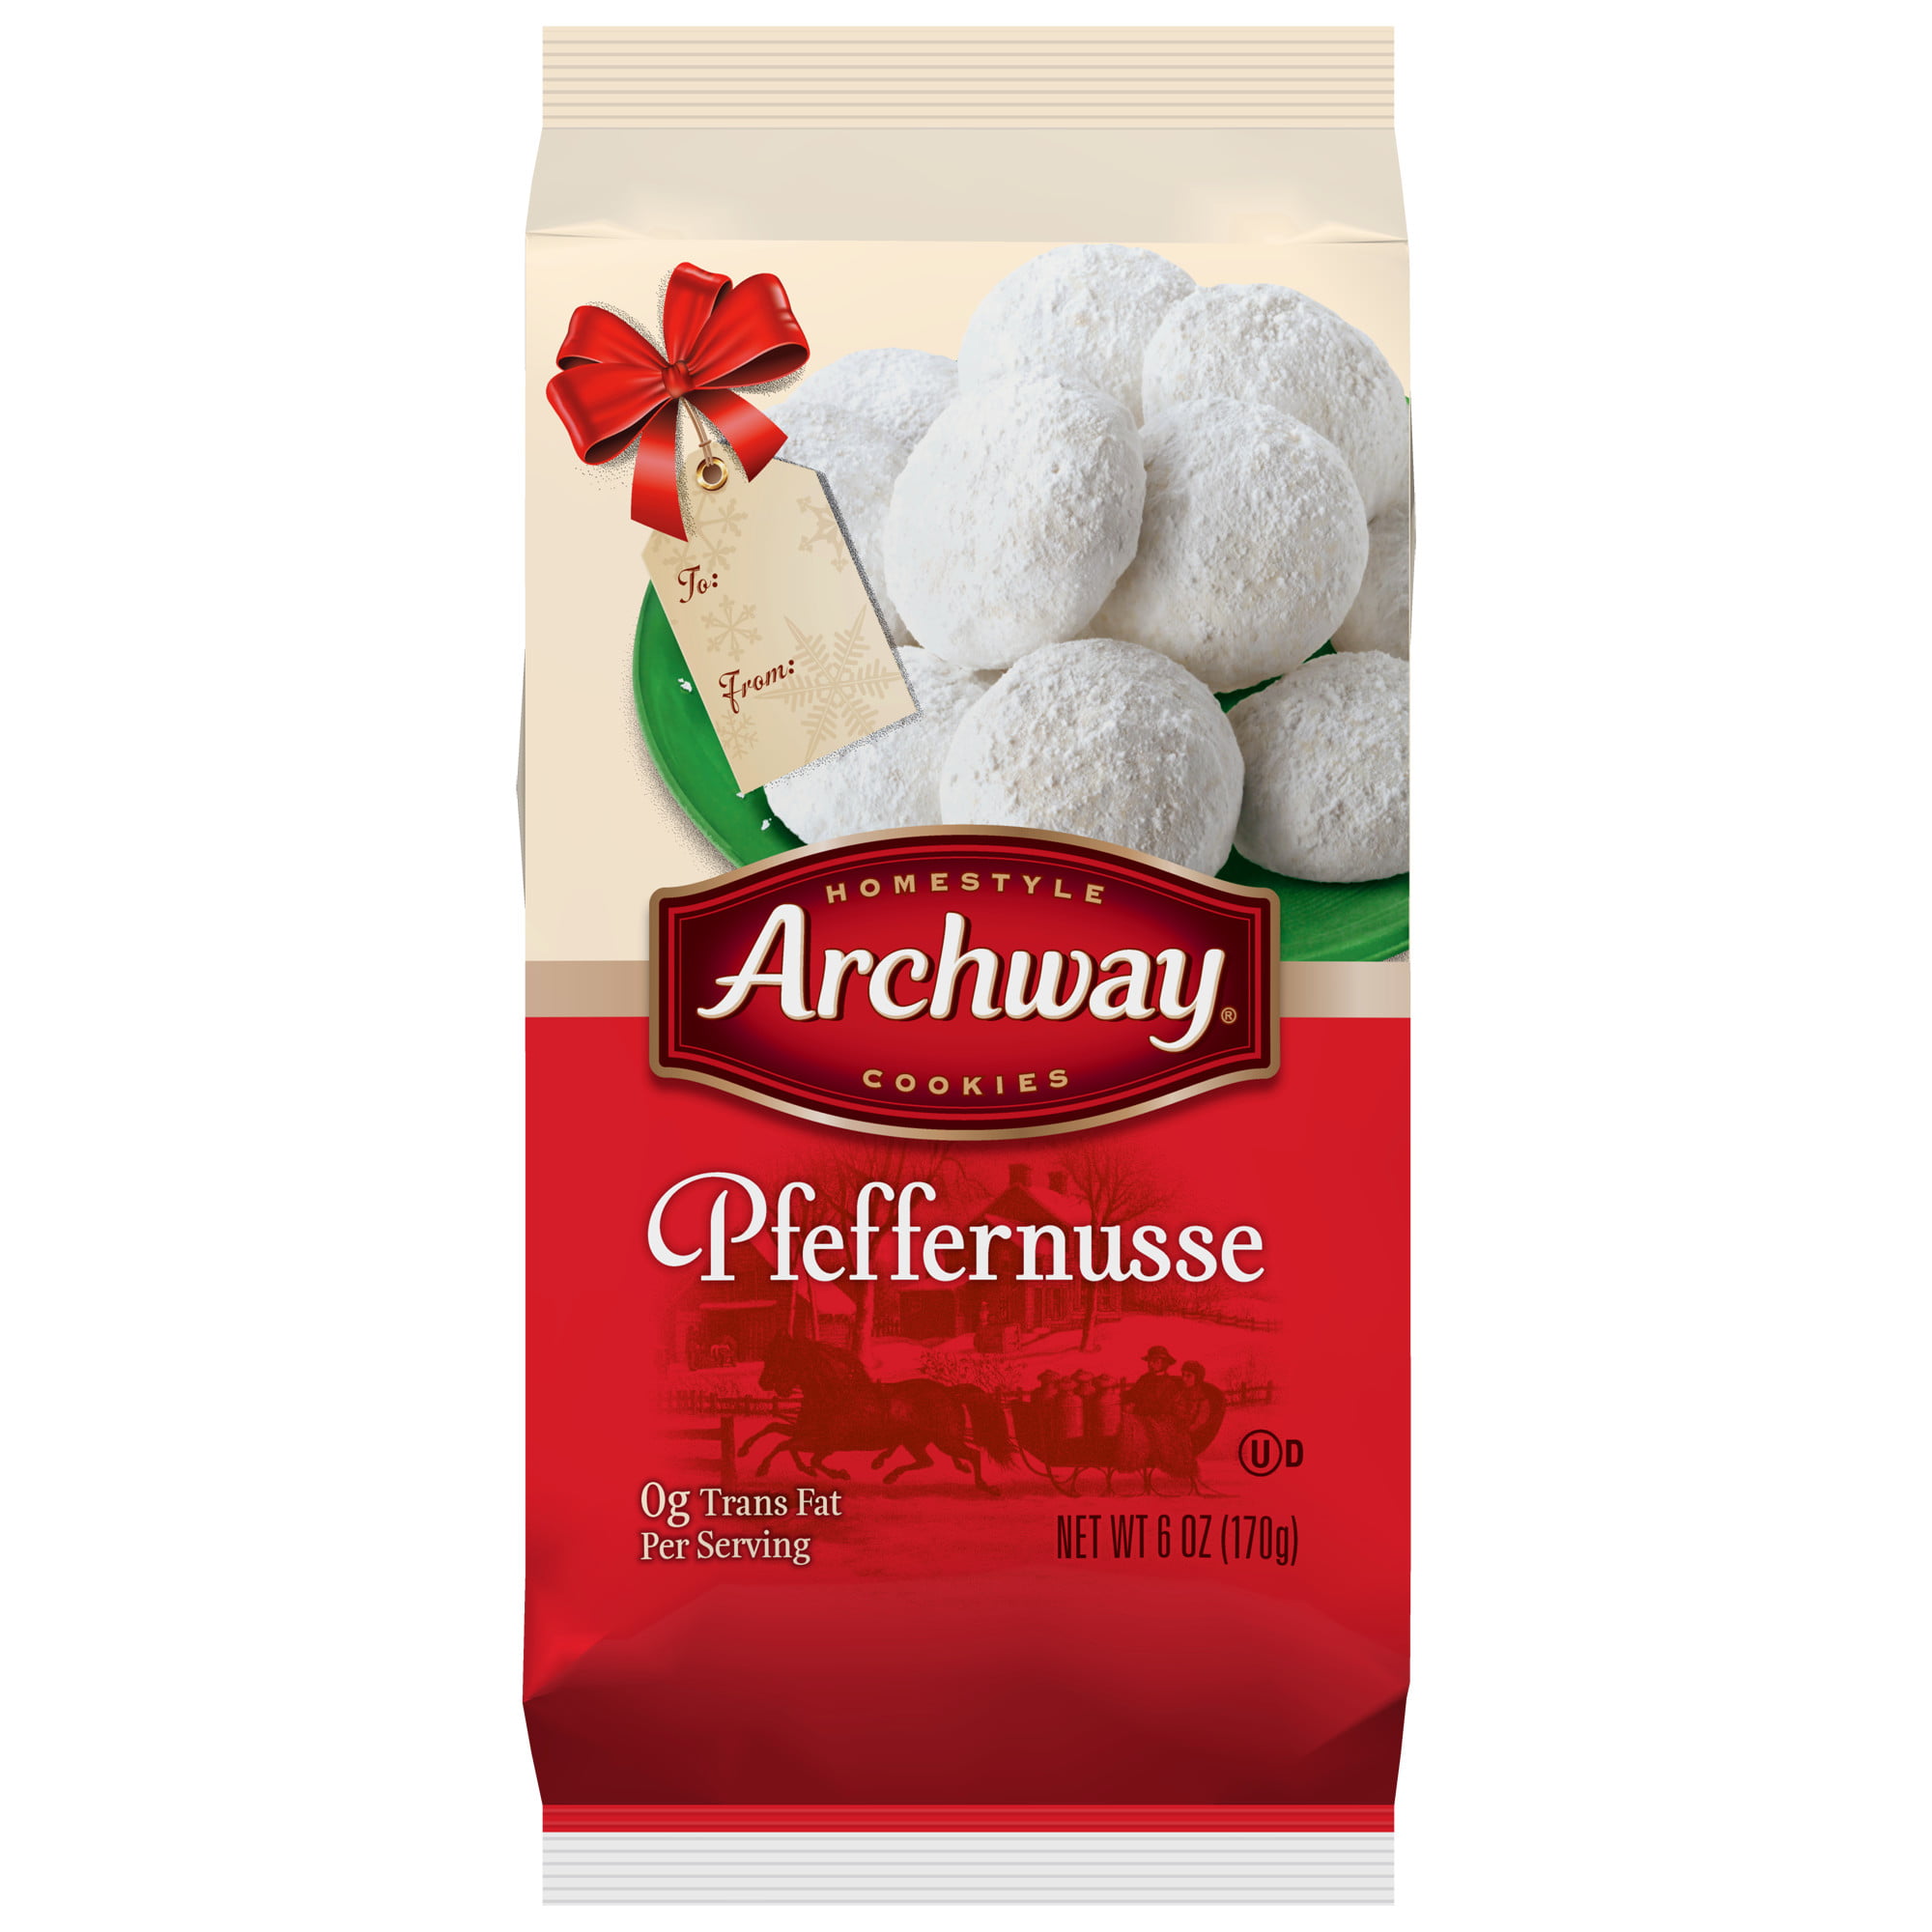 Best discontinued archway christmas cookies from archway date filled cookie...